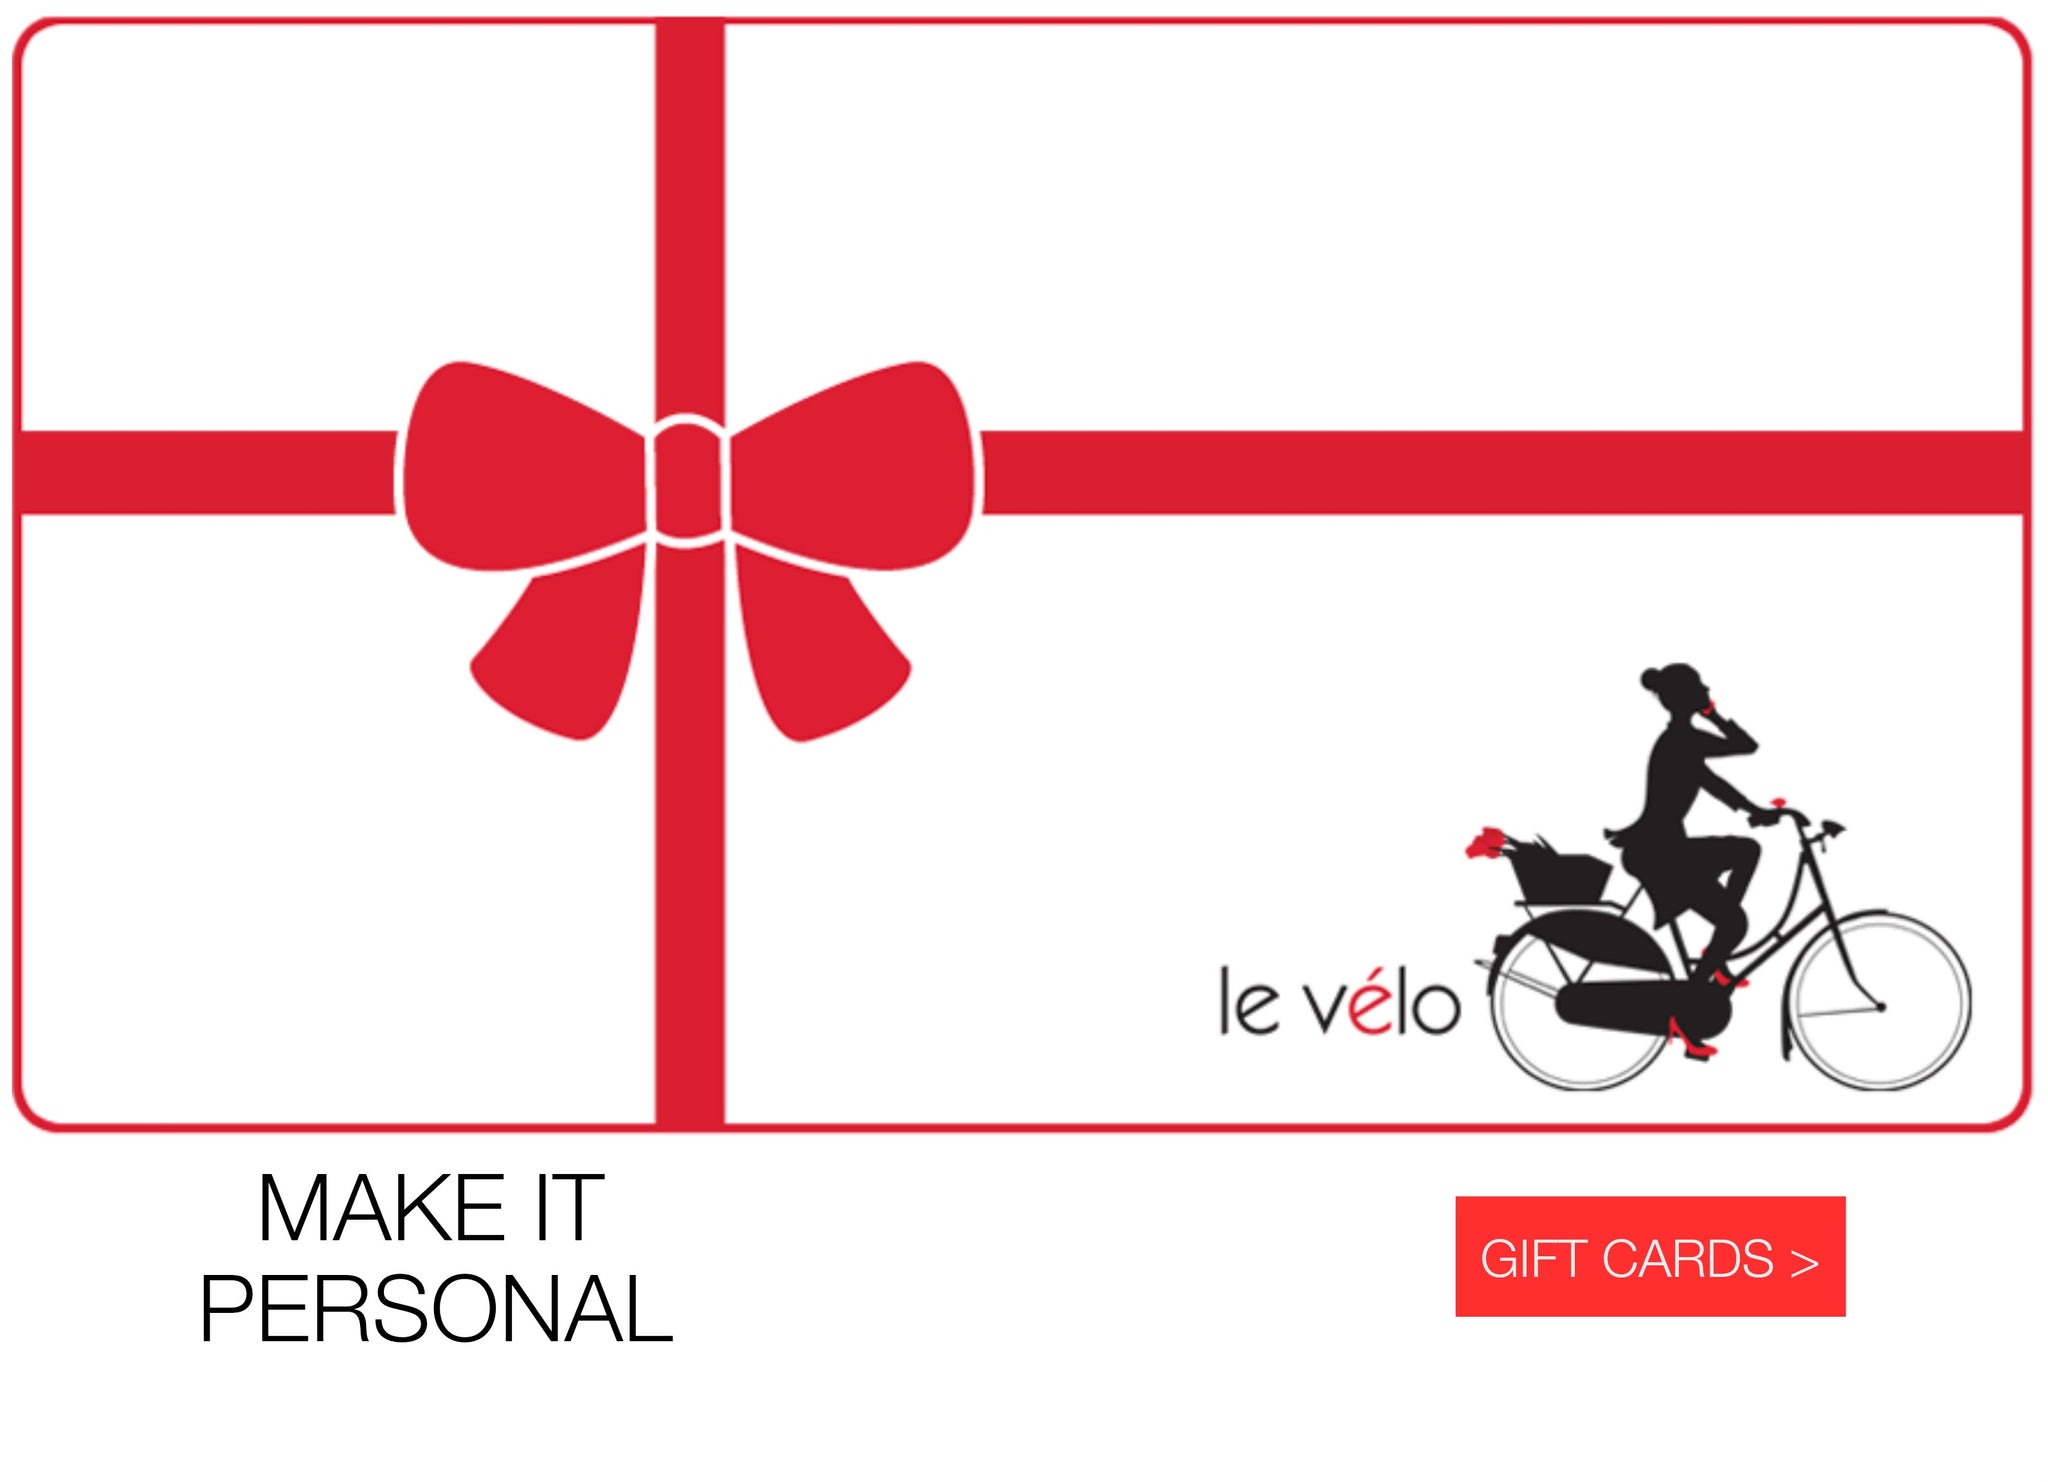 Gift Cards available at Le Velo Victoria